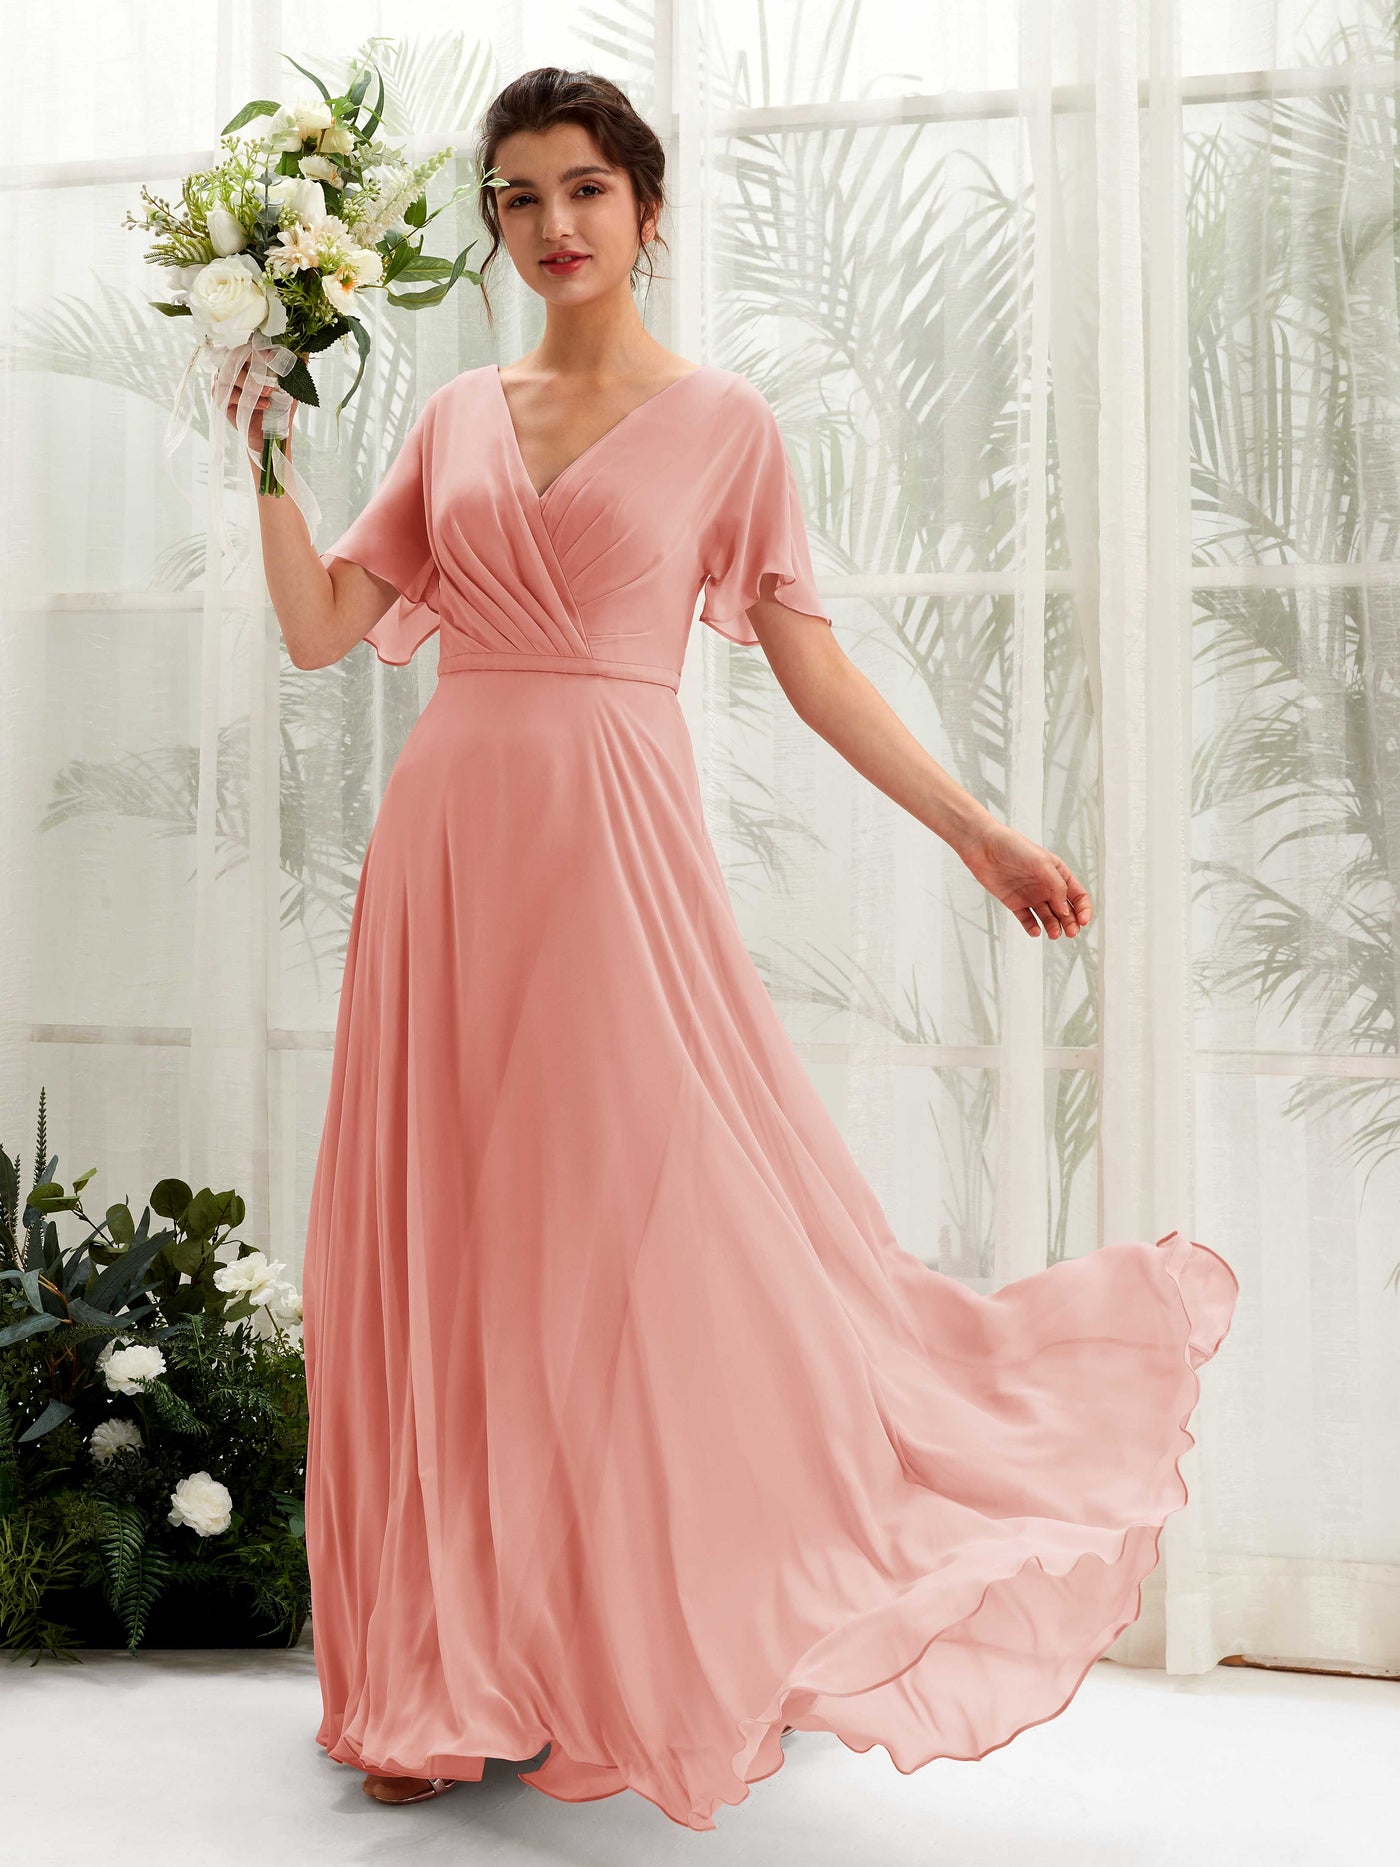 Champagne Rose Bridesmaid Dresses Bridesmaid Dress A-line Chiffon V-neck Full Length Short Sleeves Wedding Party Dress (81224606)#color_champagne-rose